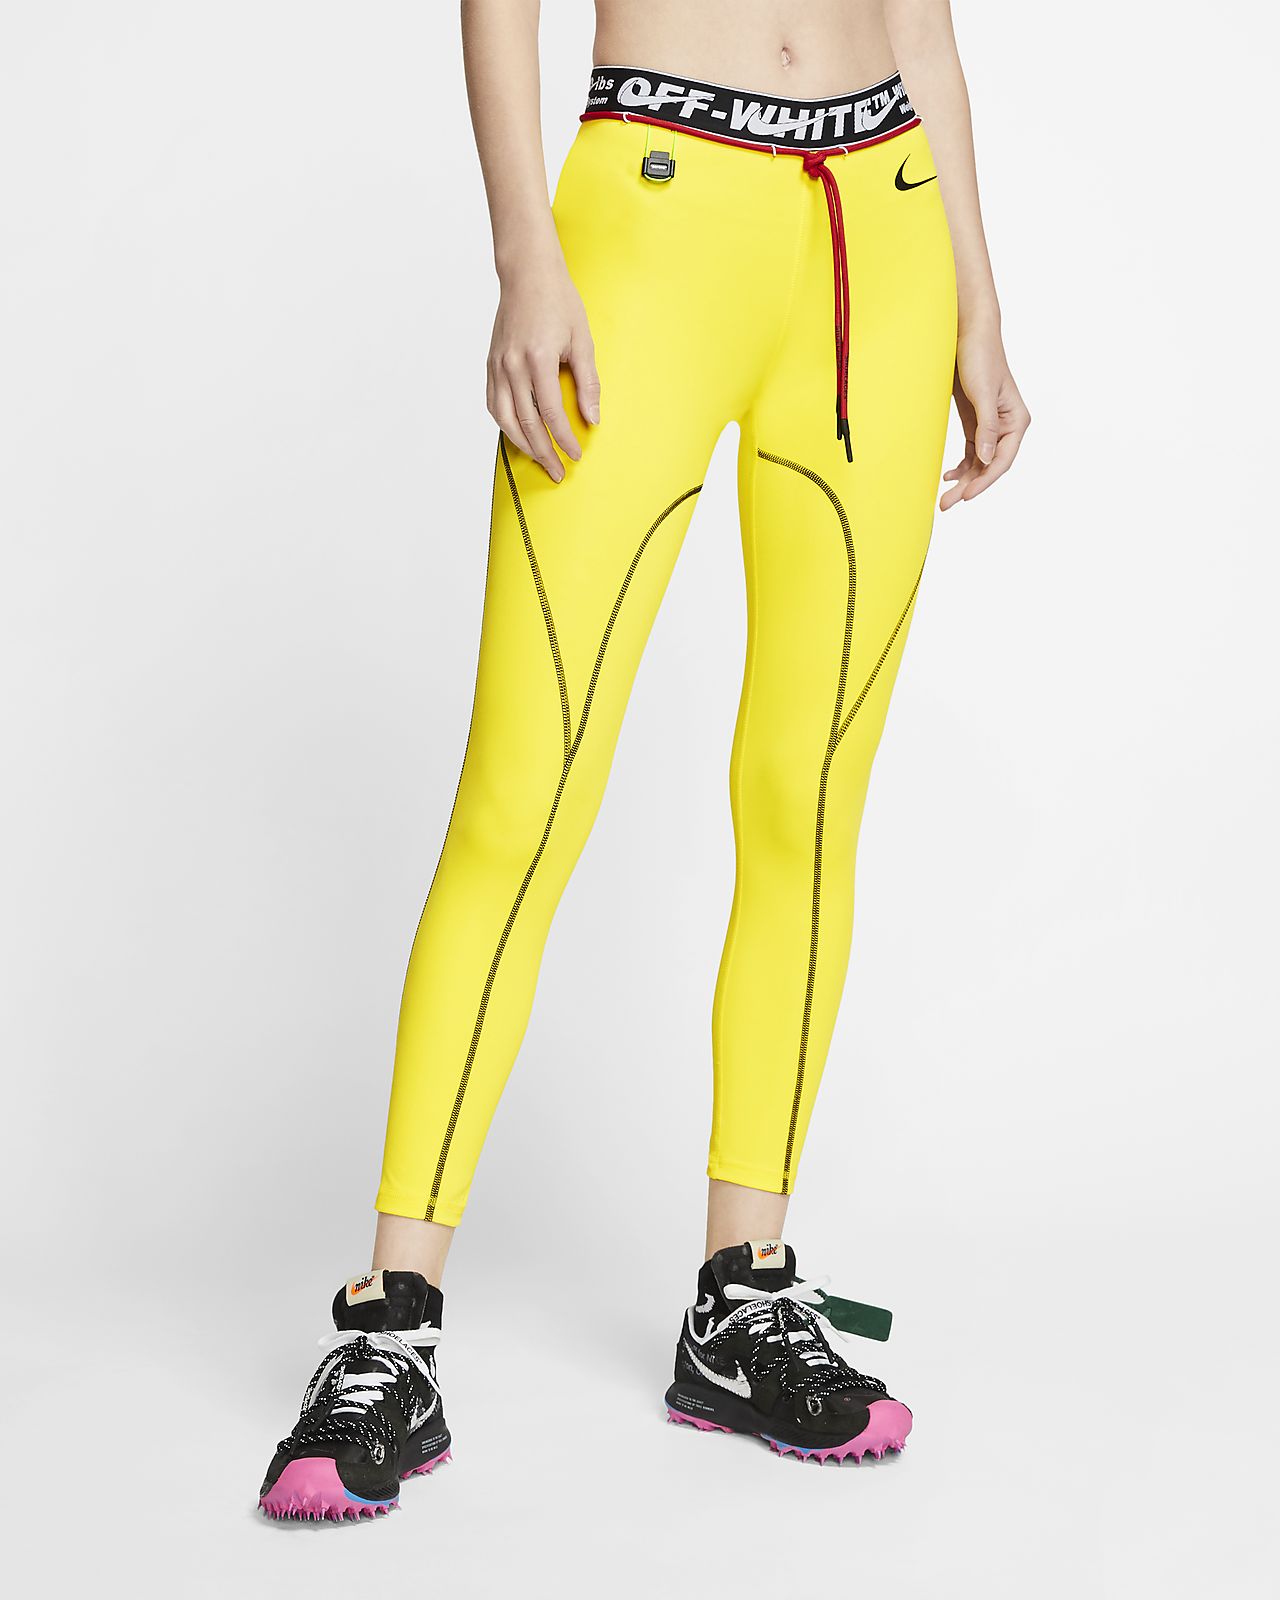 off white nike women's tights